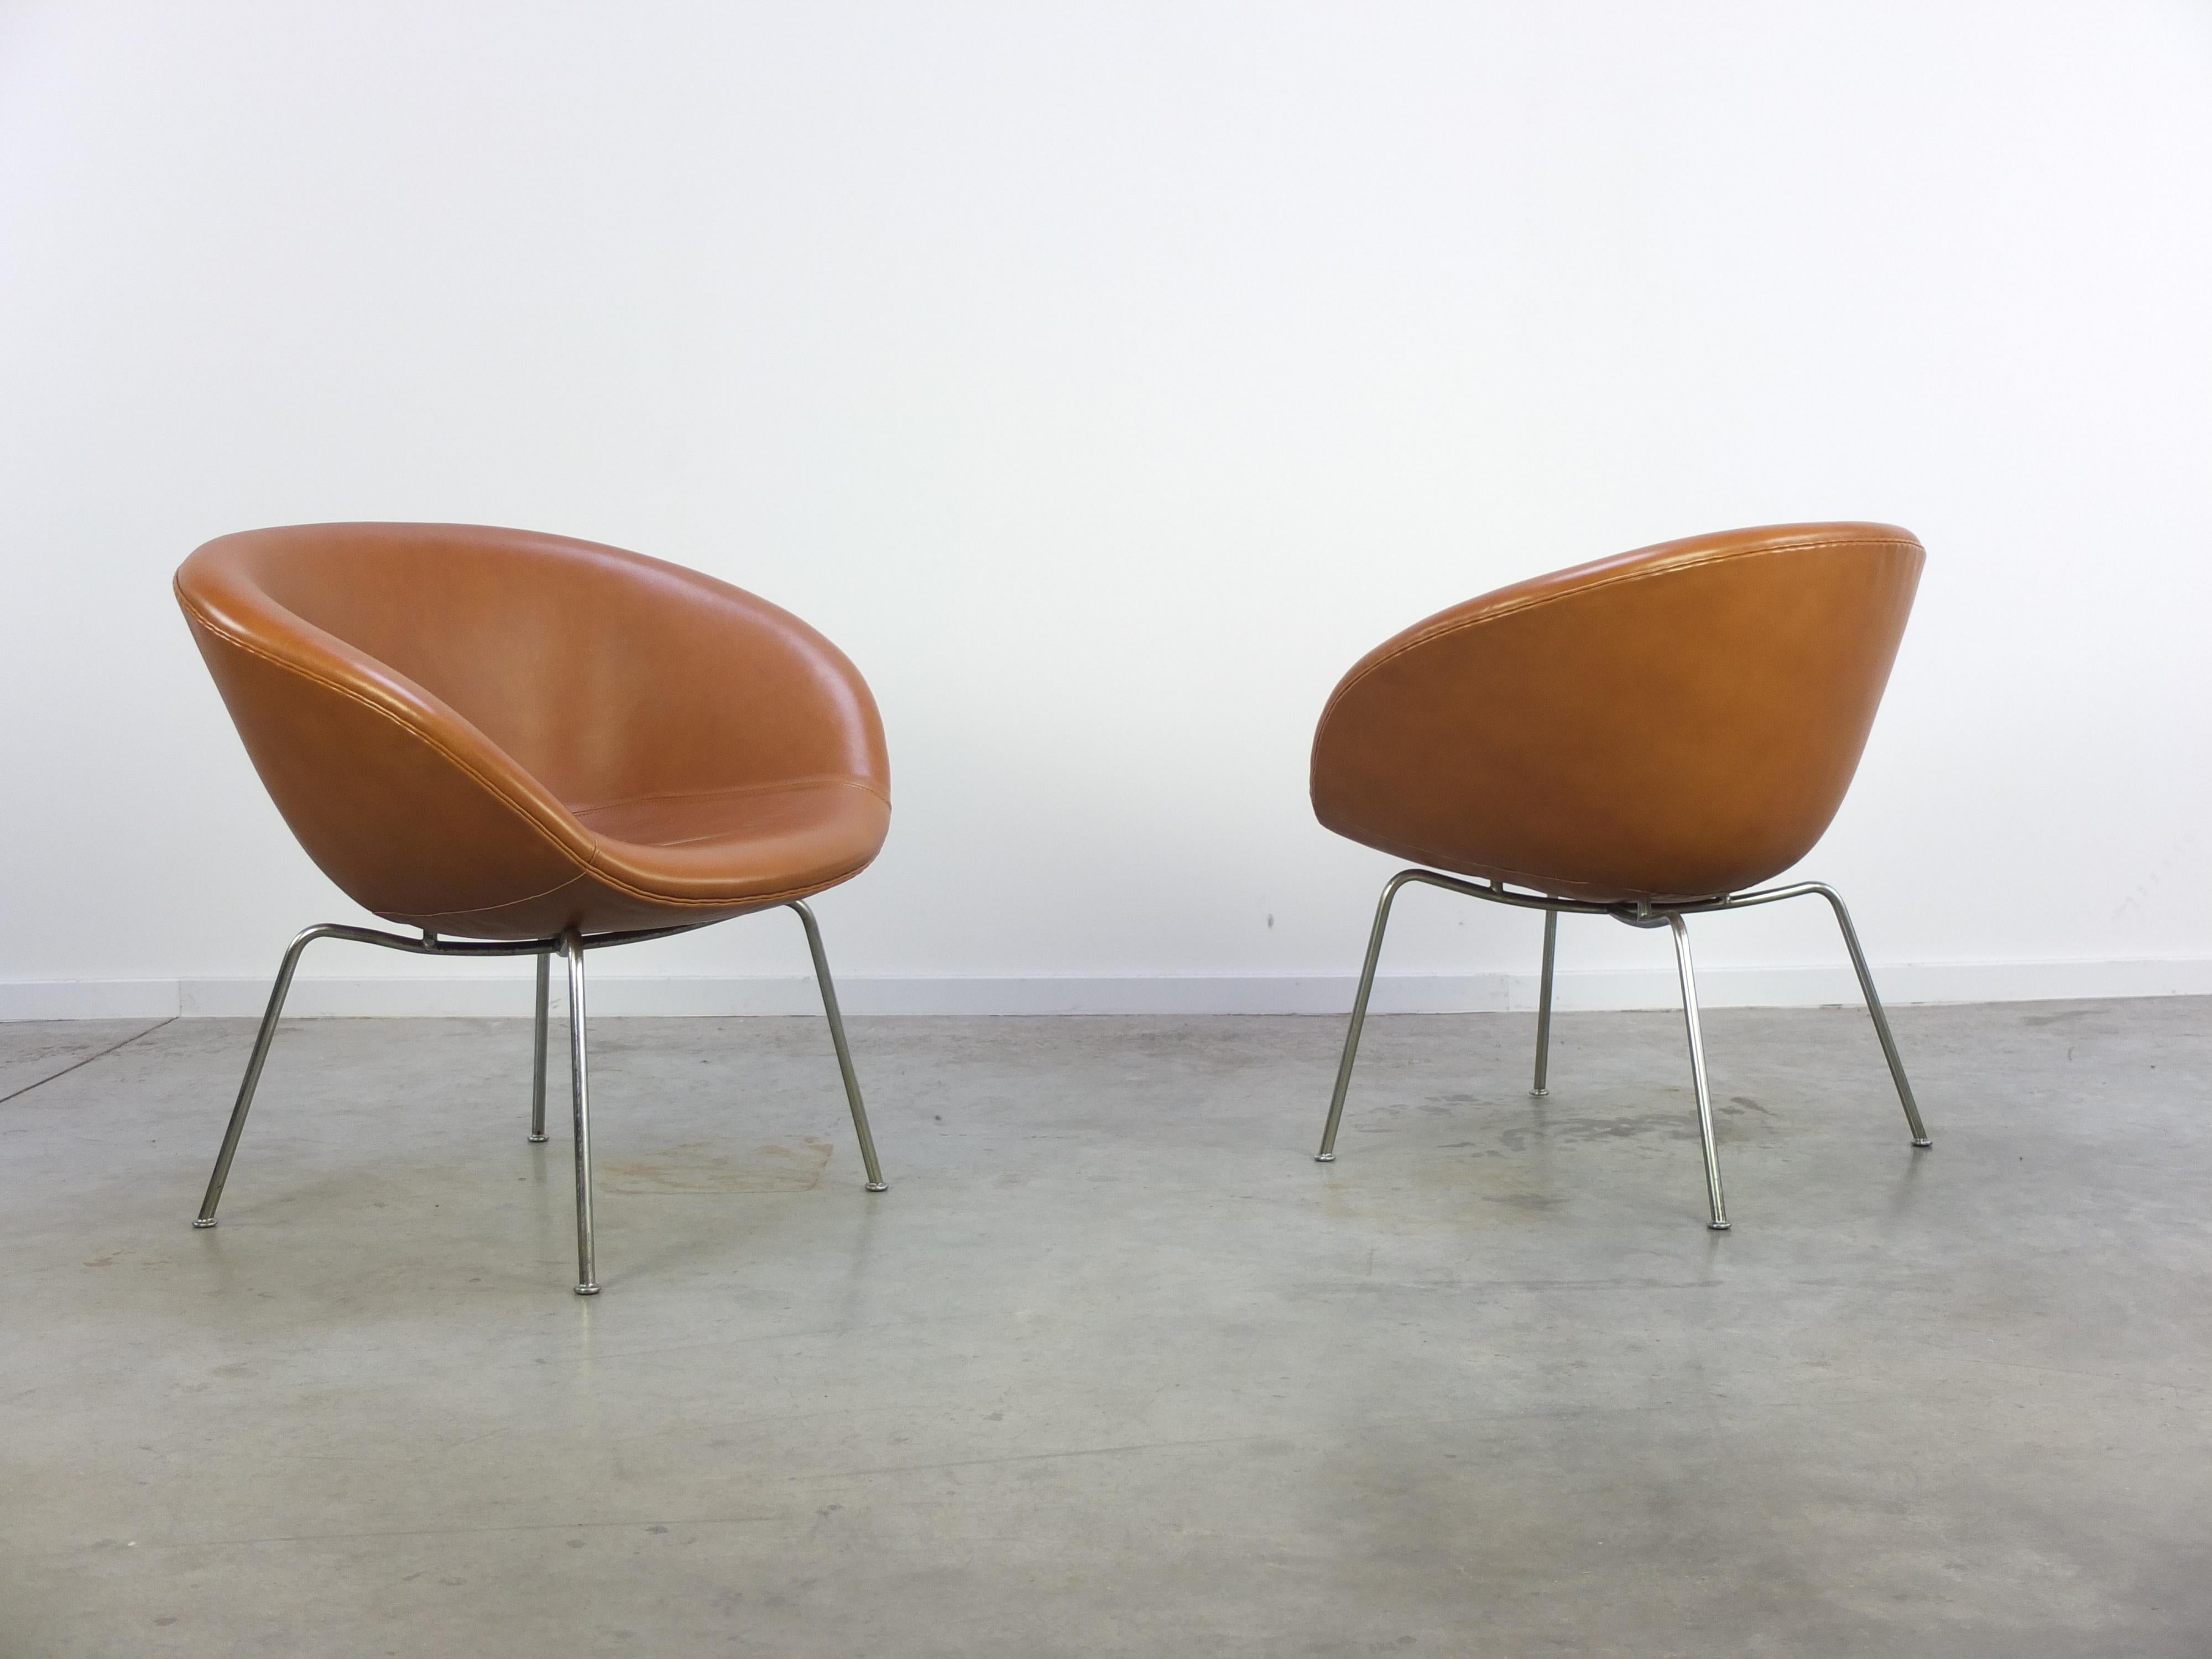 Early Pair of 'Pot' Lounge Chairs by Arne Jacobsen for Fritz Hansen, 1950s For Sale 8